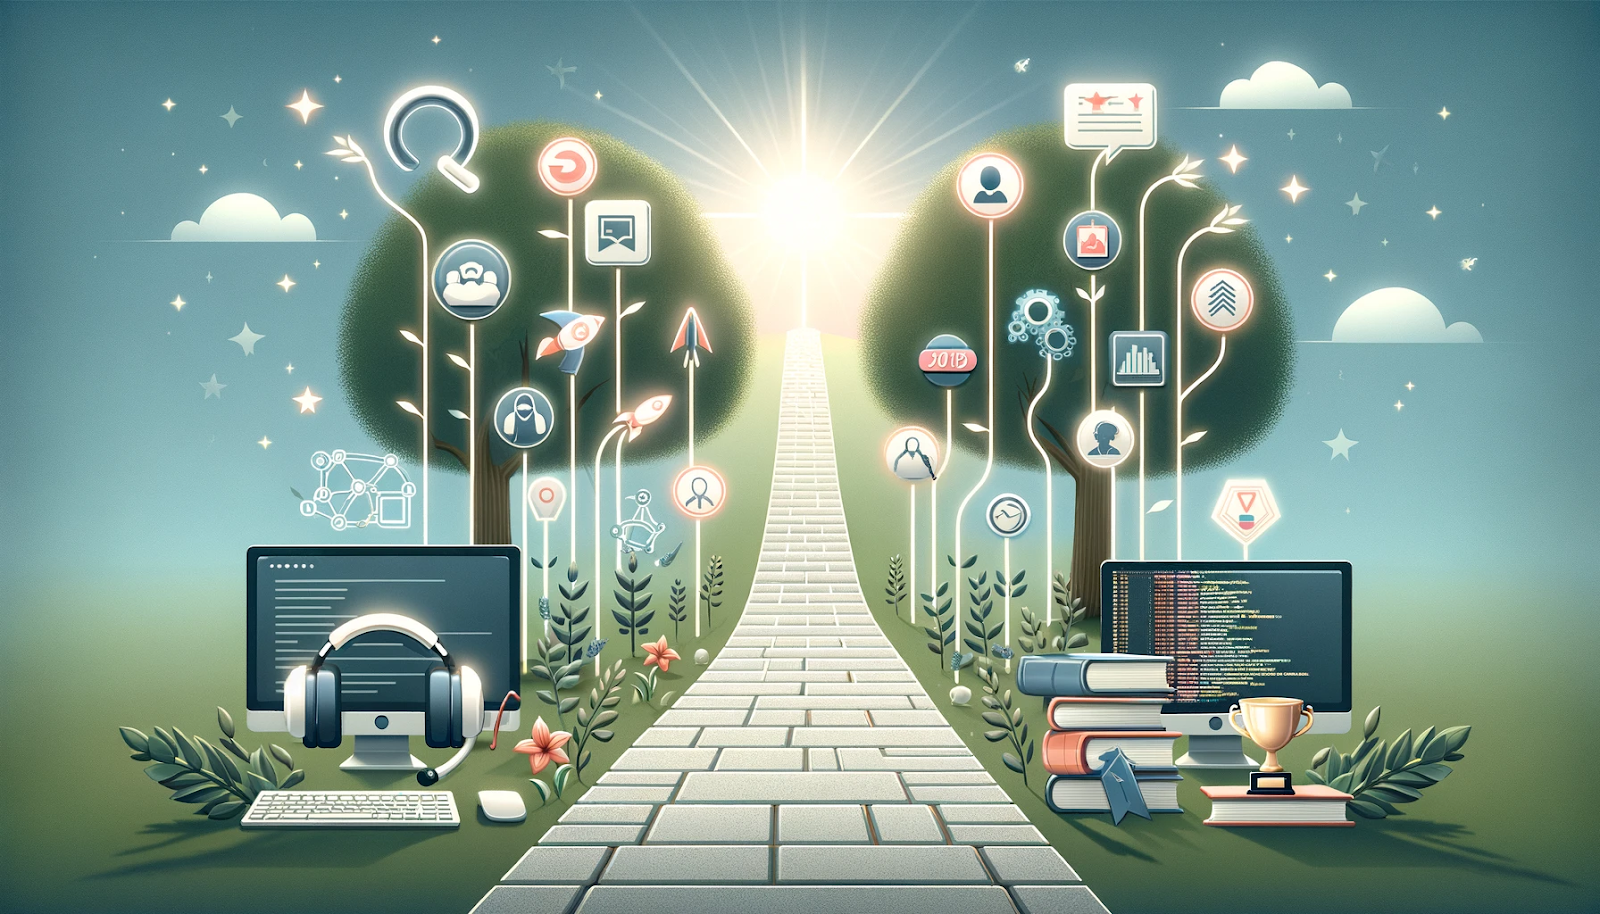 Image depicting a career growth pathway. The pathway is lined with symbols for different career stages, including a headset for customer support, a computer with code for data analysis, books and certificates for learning, and a trophy for achievements. The path leads towards a bright horizon, symbolizing future career opportunities and growth in a light and inspiring atmosphere.